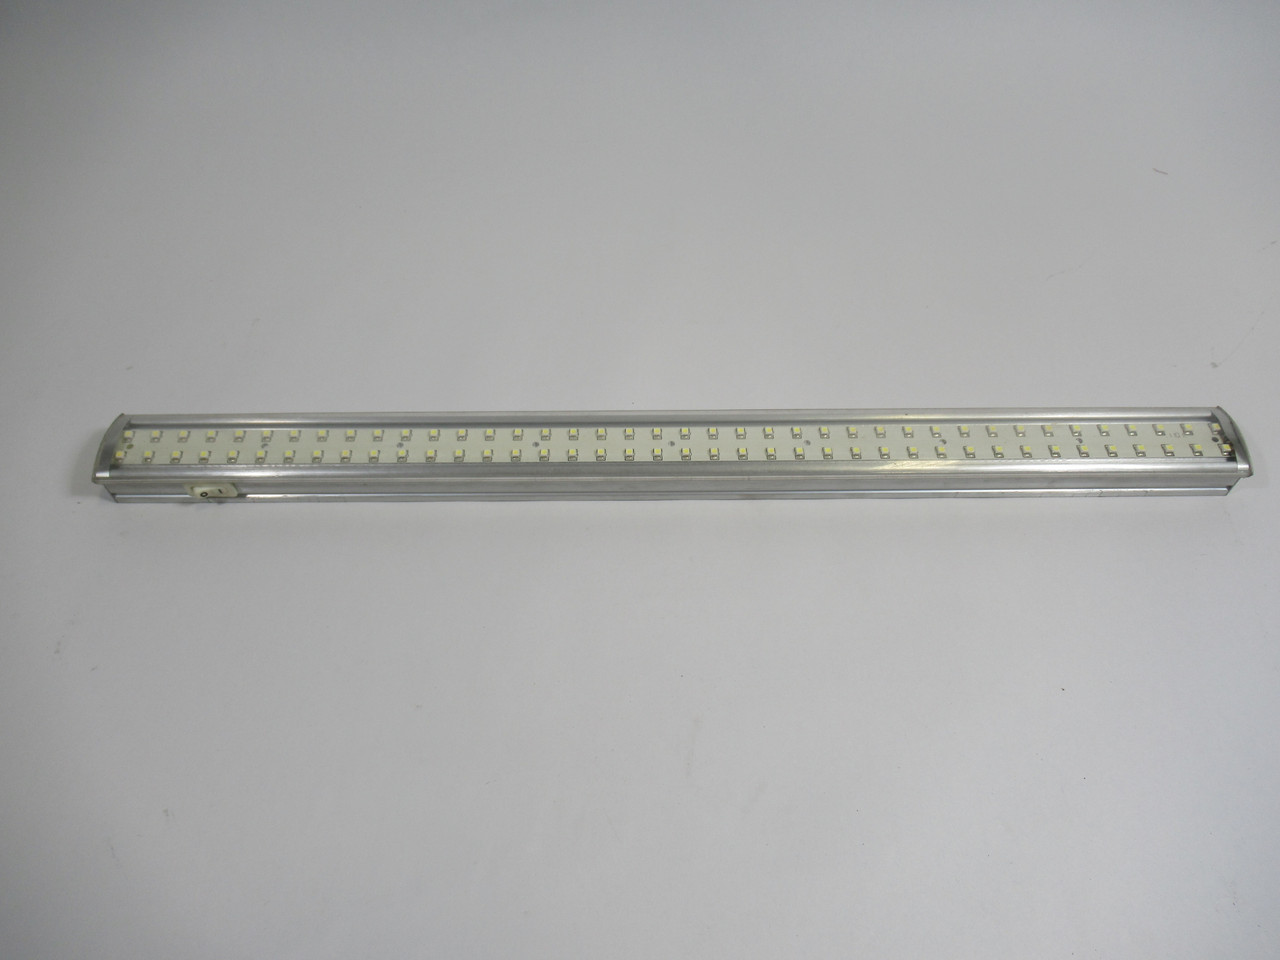 Radionic ZX515 LED Undercabinet Fixture 120VAC 0.2A 60Hz *No Cable* USED